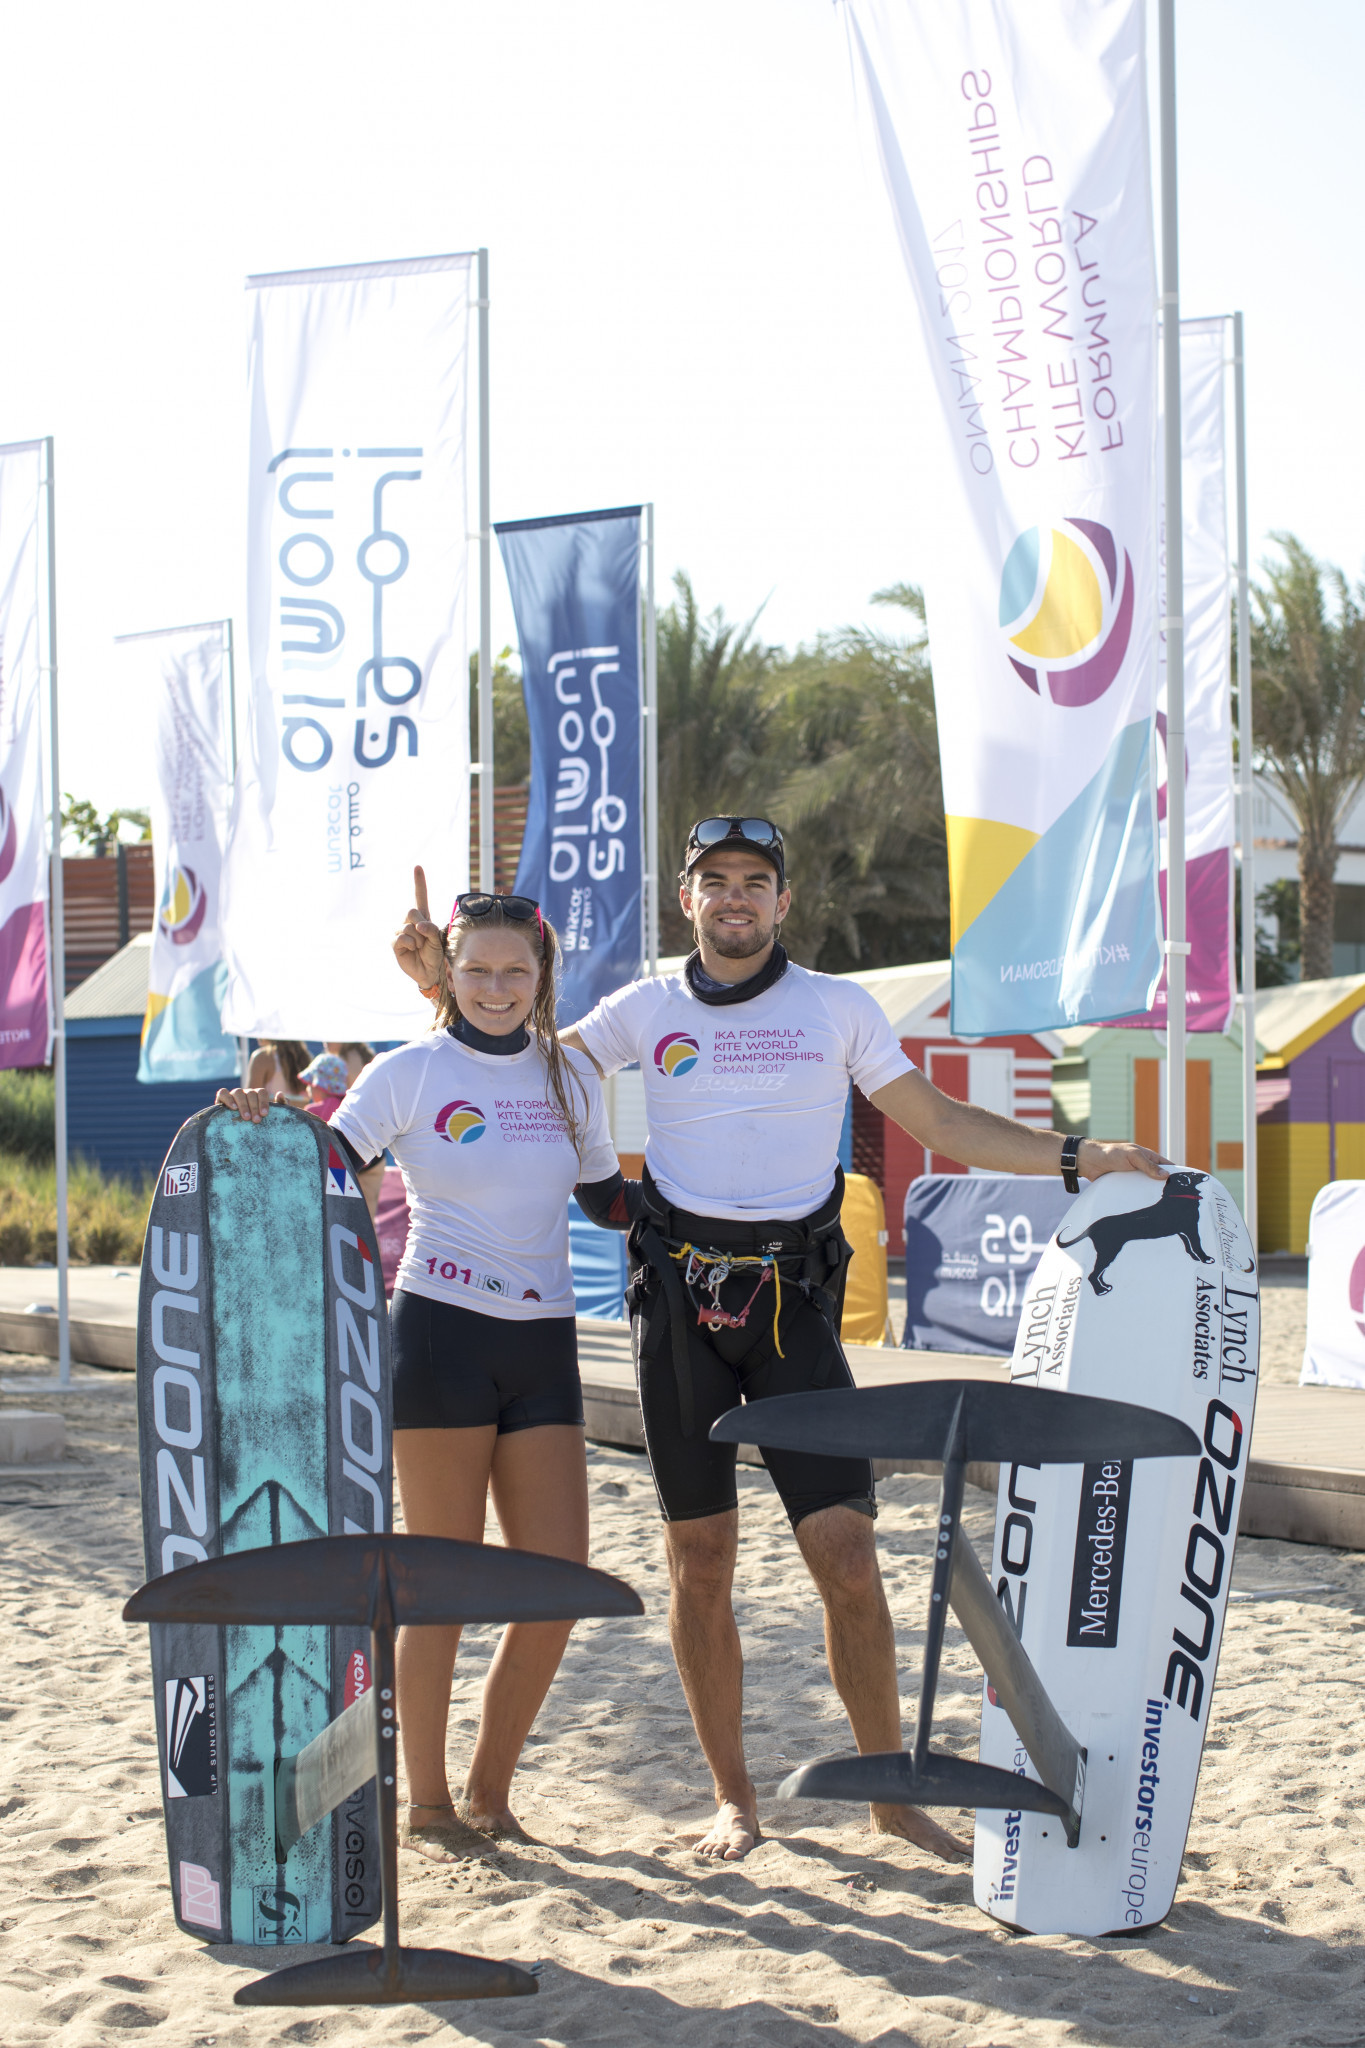 Nico Parlier and Daniela Moroz were crowned champions of the IKA Formula Kite World Championships after dominant displays throughout the week ©IKA Formula Kite World Championships